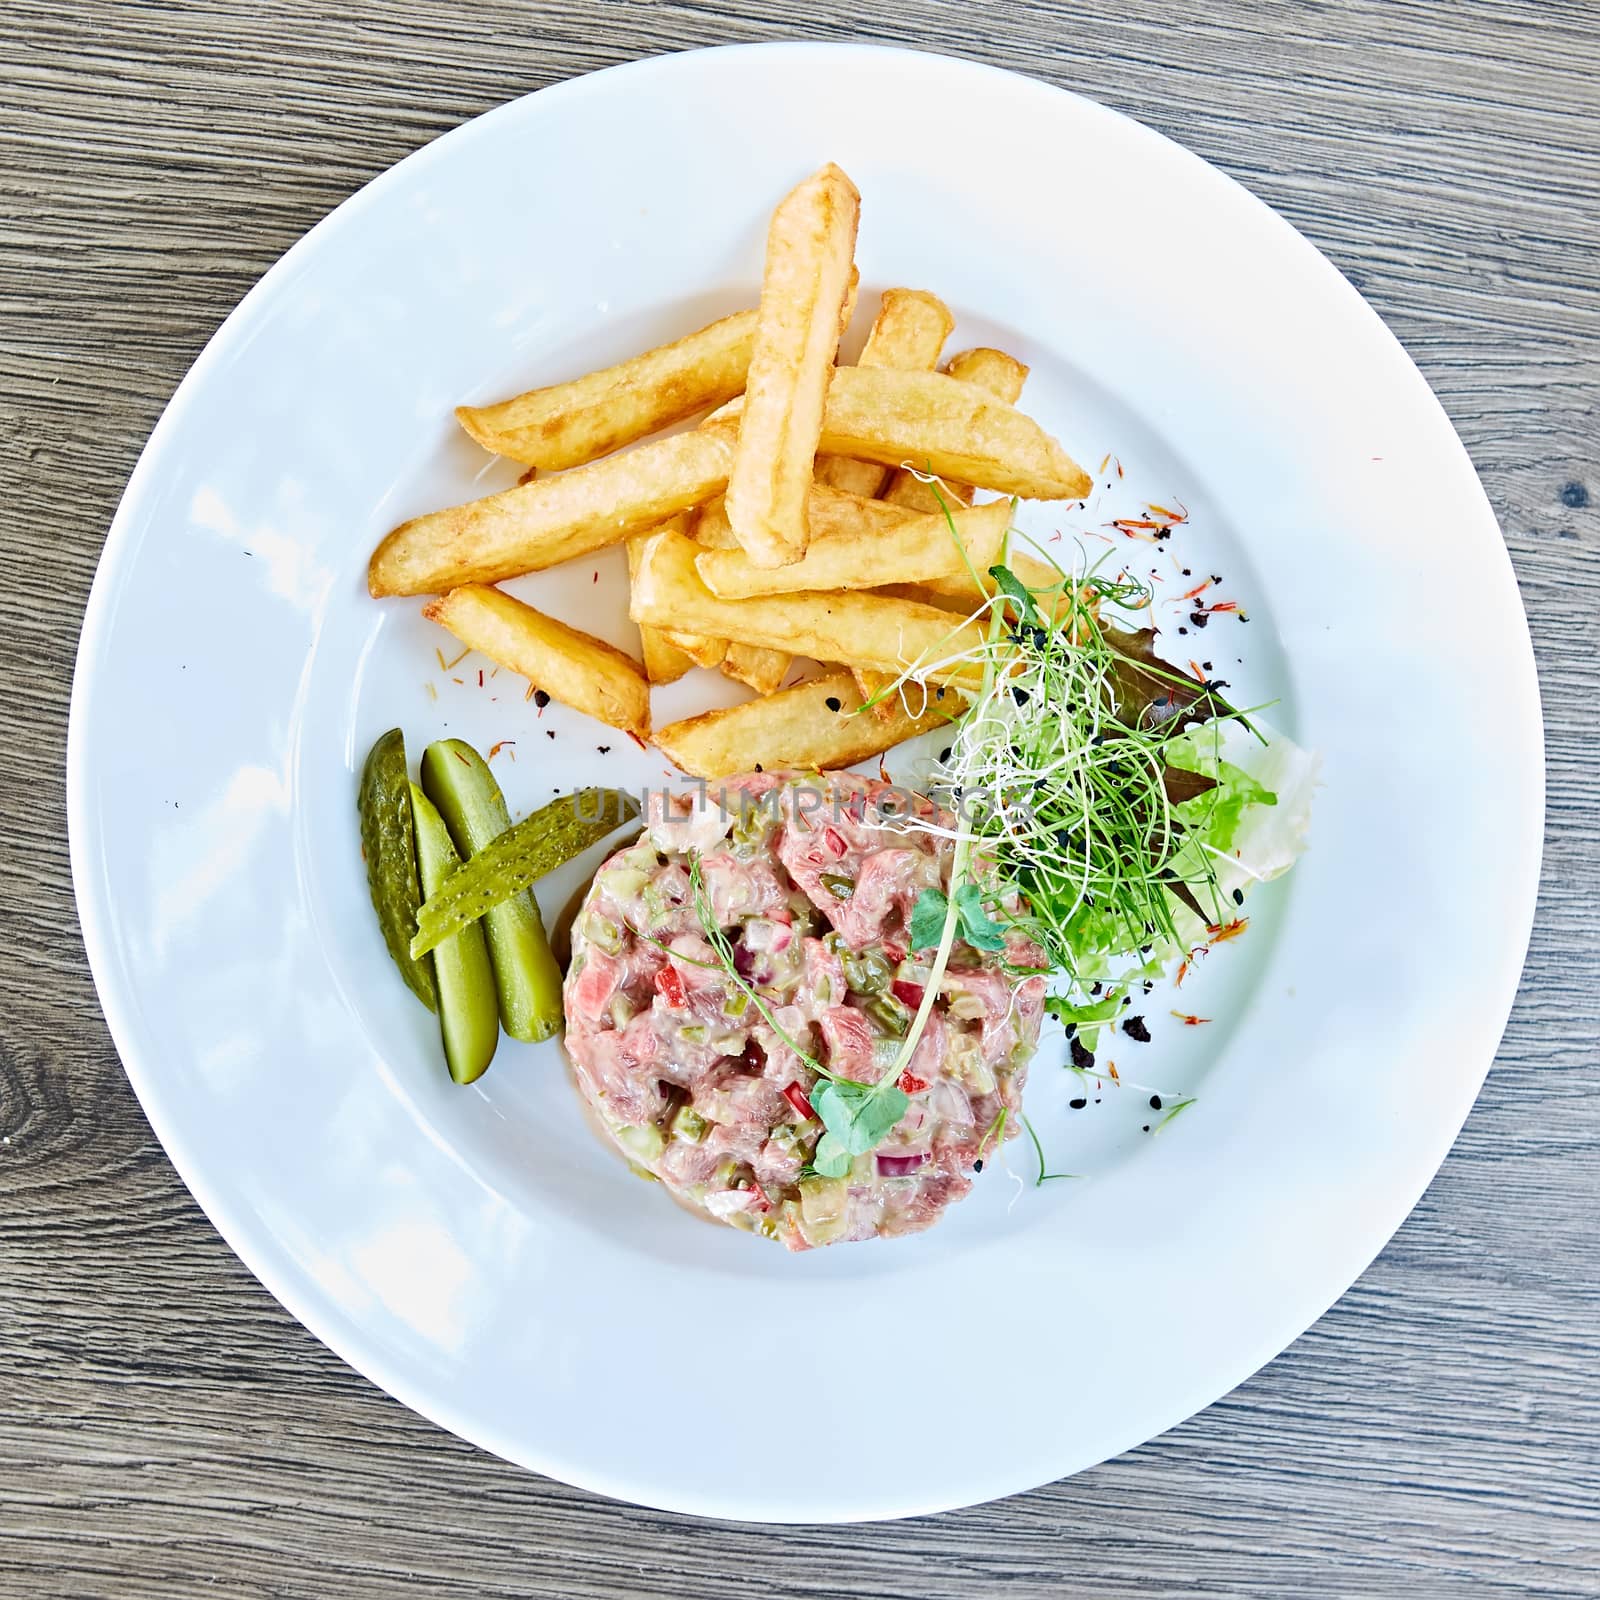 Meat tartar with french fries and vegetable salad. by sarymsakov